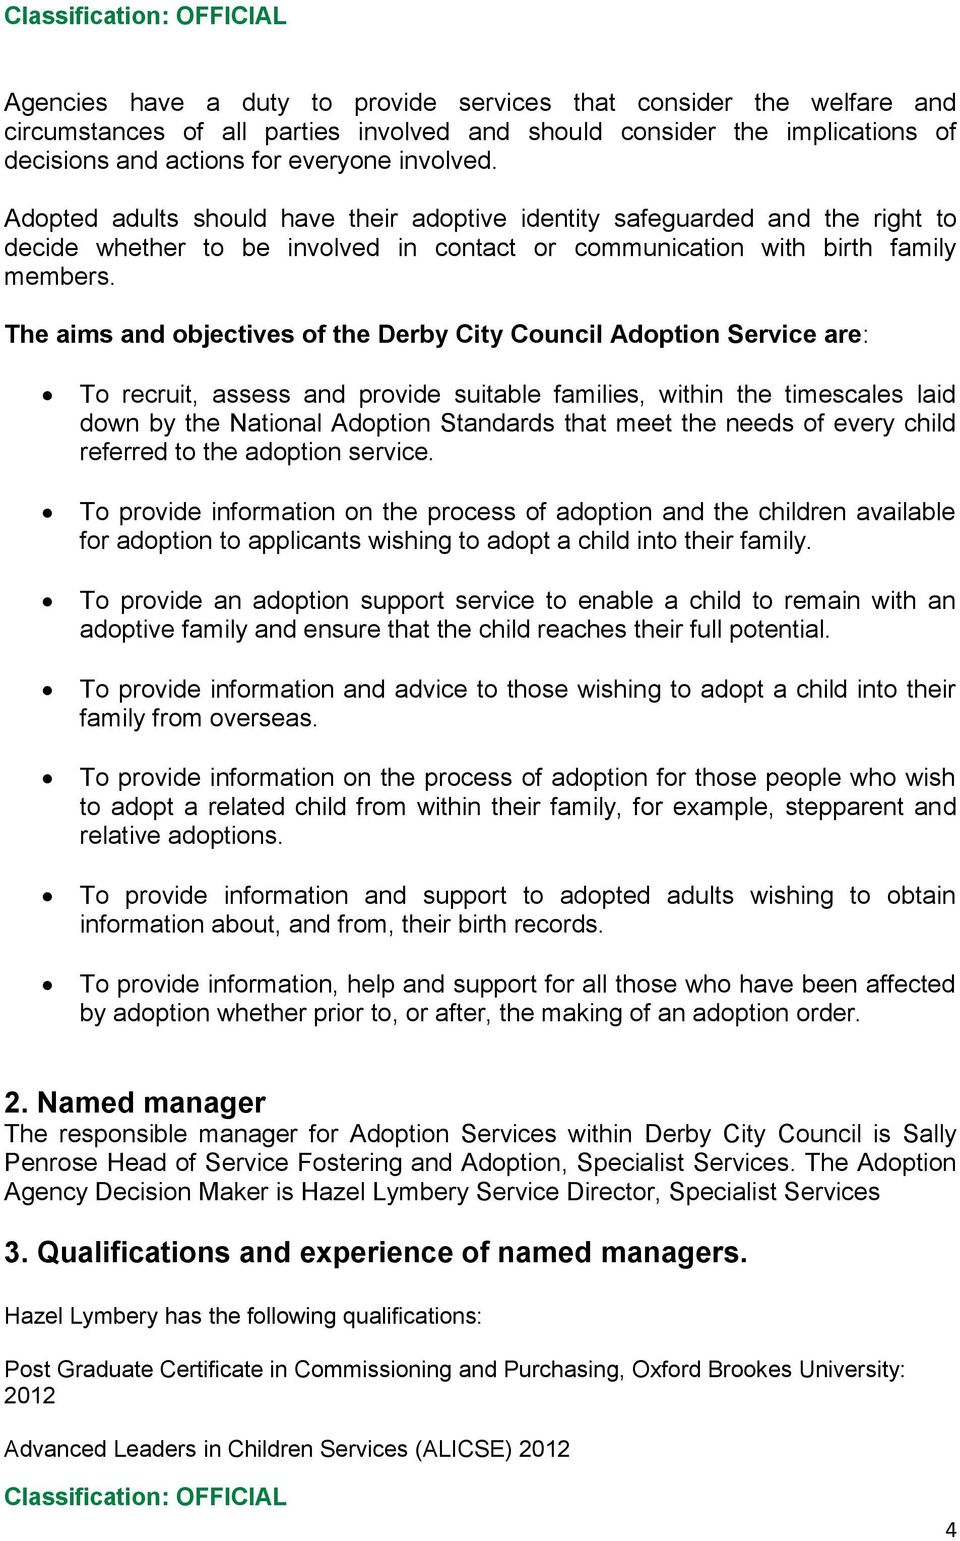 The aims and objectives of the Derby City Council Adoption Service are: To recruit, assess and provide suitable families, within the timescales laid down by the National Adoption Standards that meet